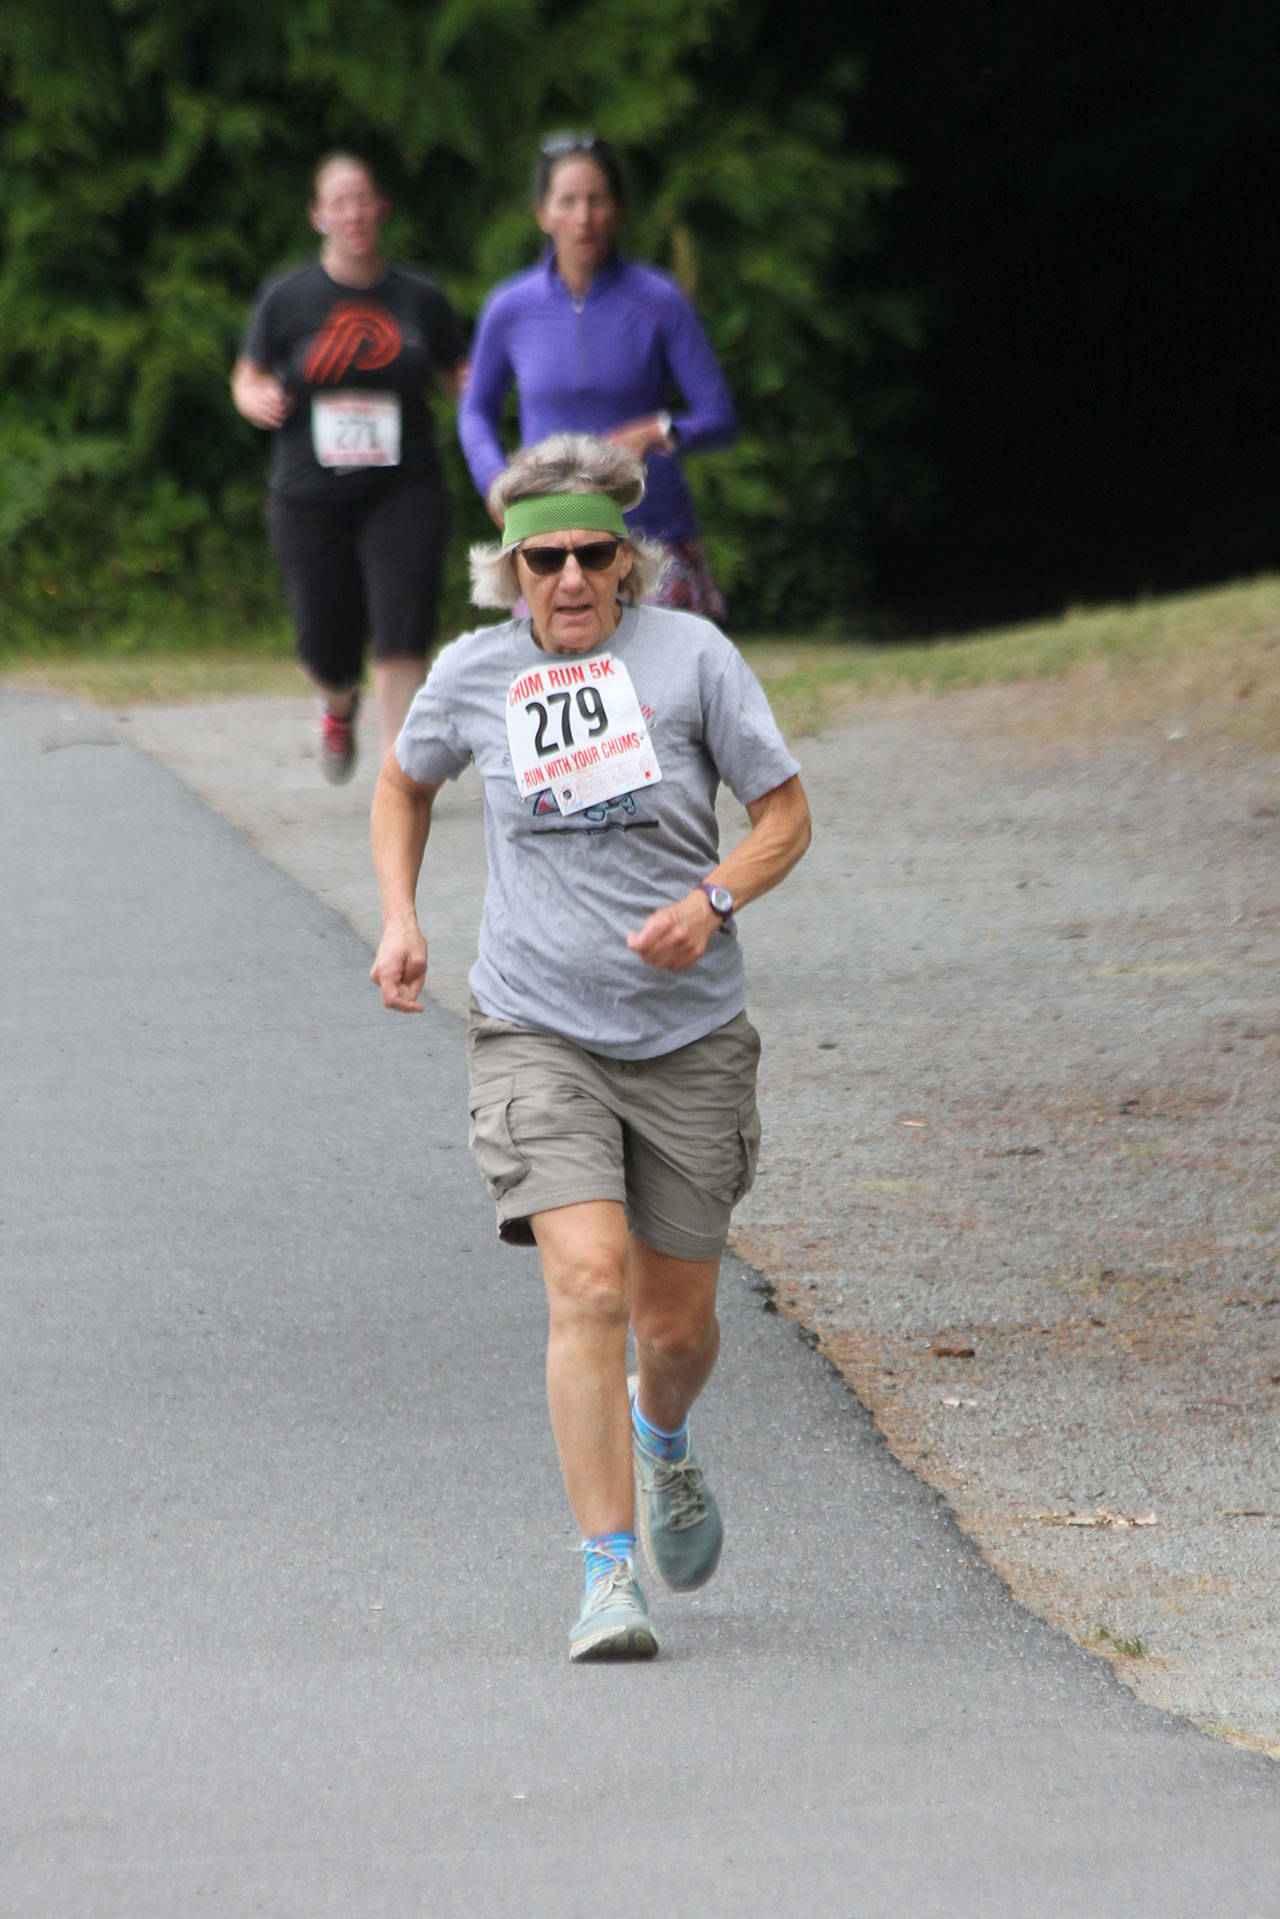 Beth Johnson hustles along the course. (Photo by Jim Waller/South Whidbey Record)